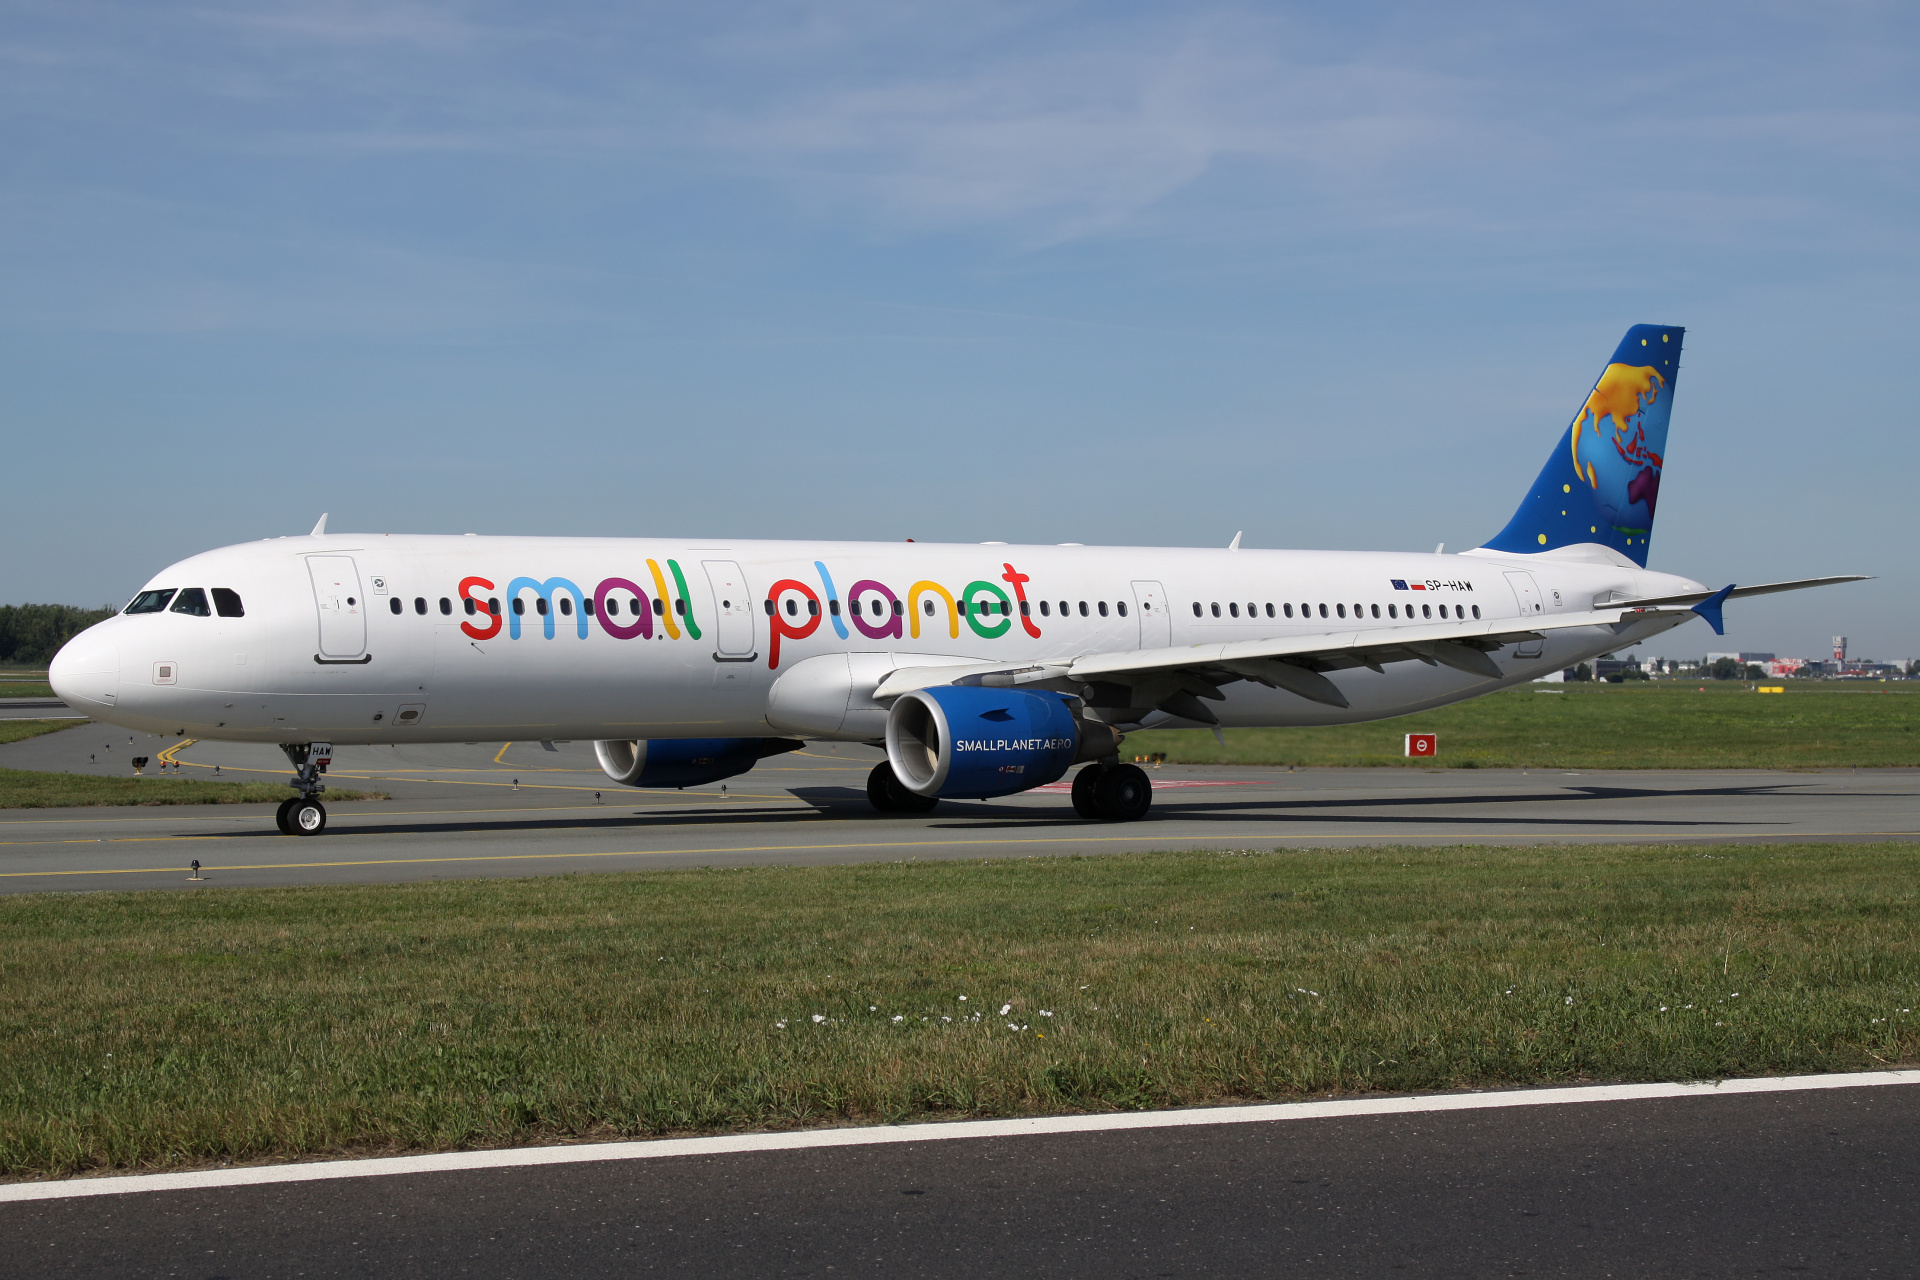 SP-HAW (Aircraft » EPWA Spotting » Airbus A321-200 » Small Planet Airlines Polska)